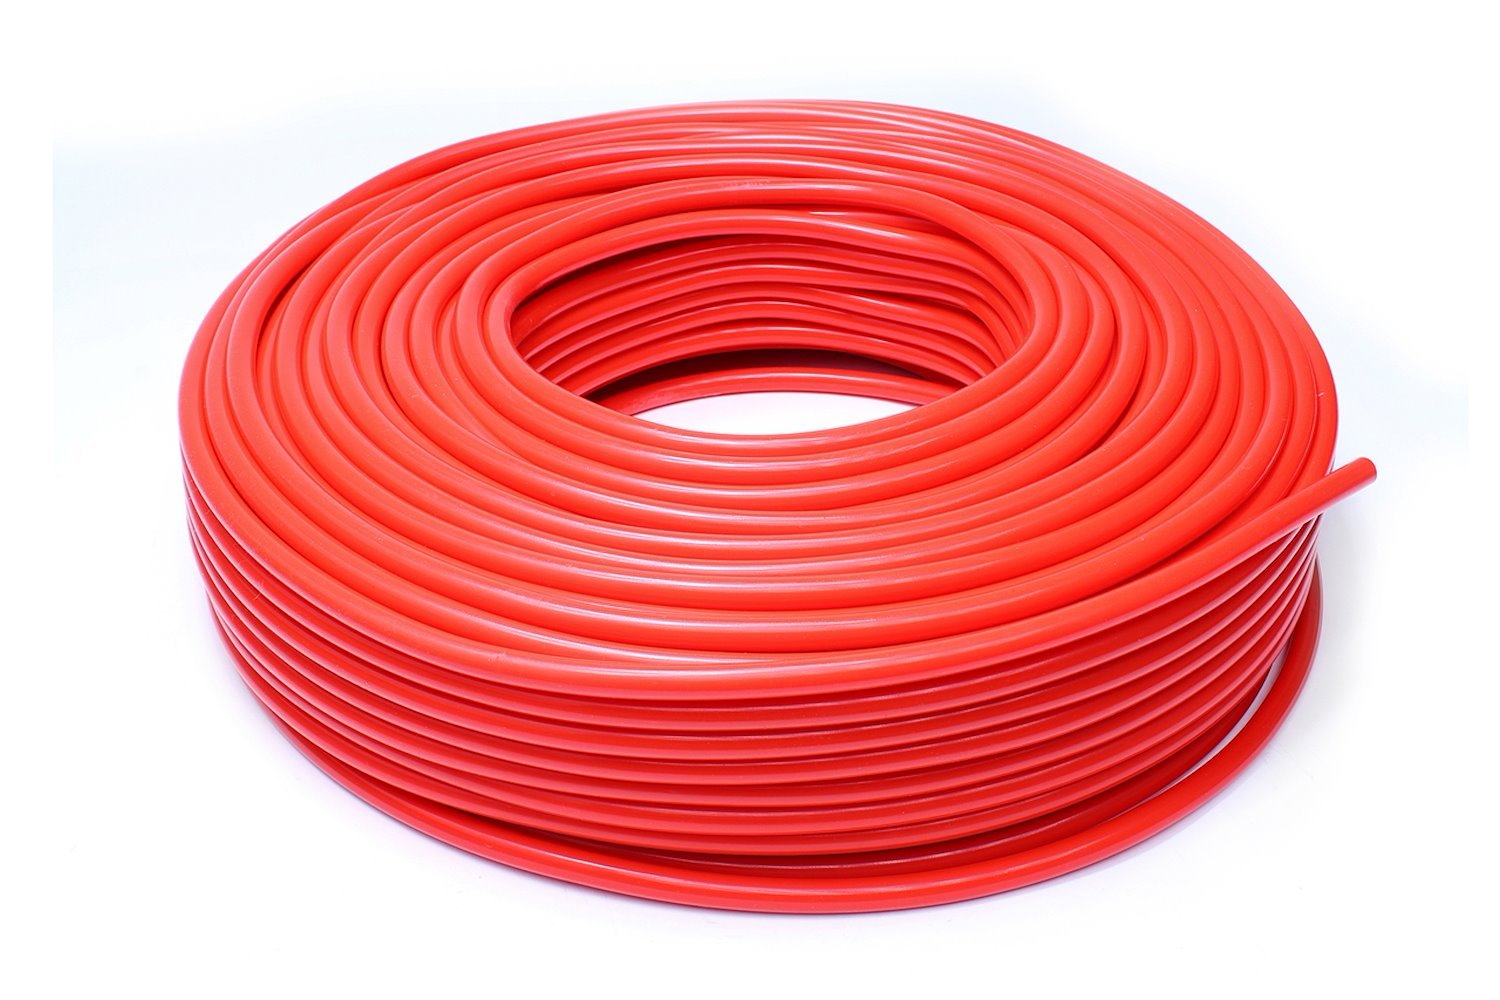 HTSVH95-REDx100 High-Temperature Silicone Vacuum Hose Tubing, 3/8 in. ID, 100 ft. Roll, Red